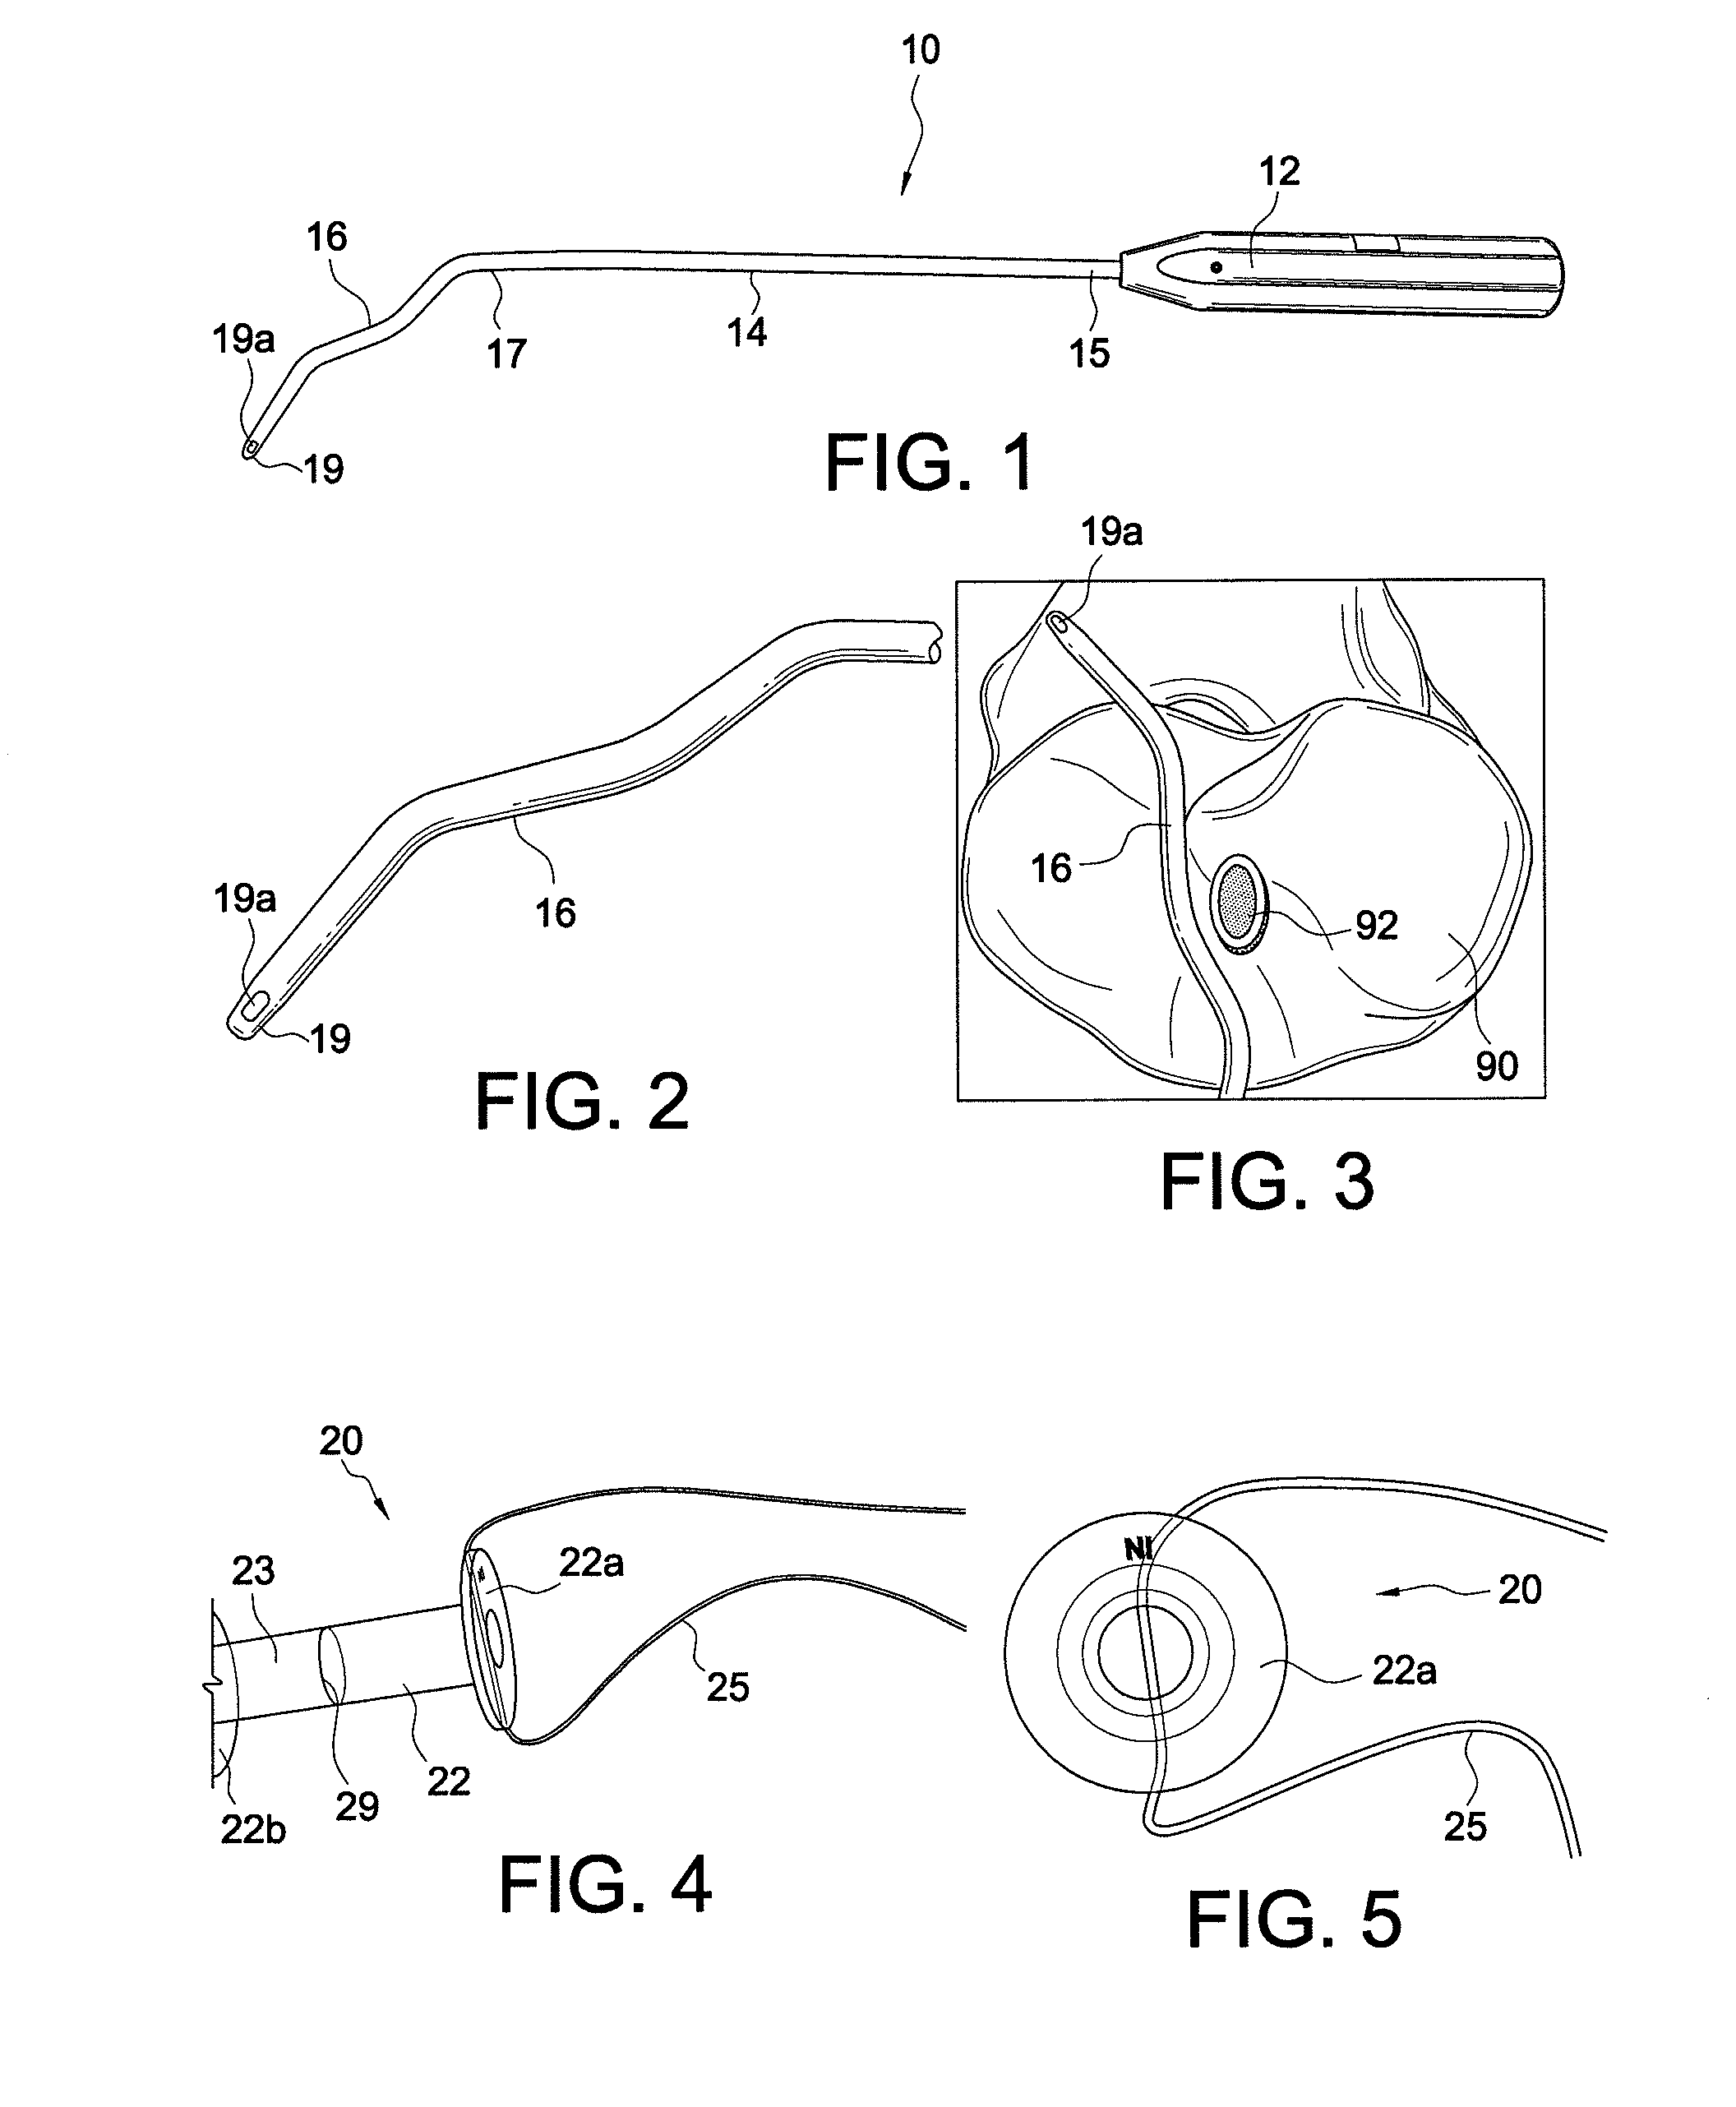 Methods and instrumentals for forming a posterior knee portal and for inserting a cannula